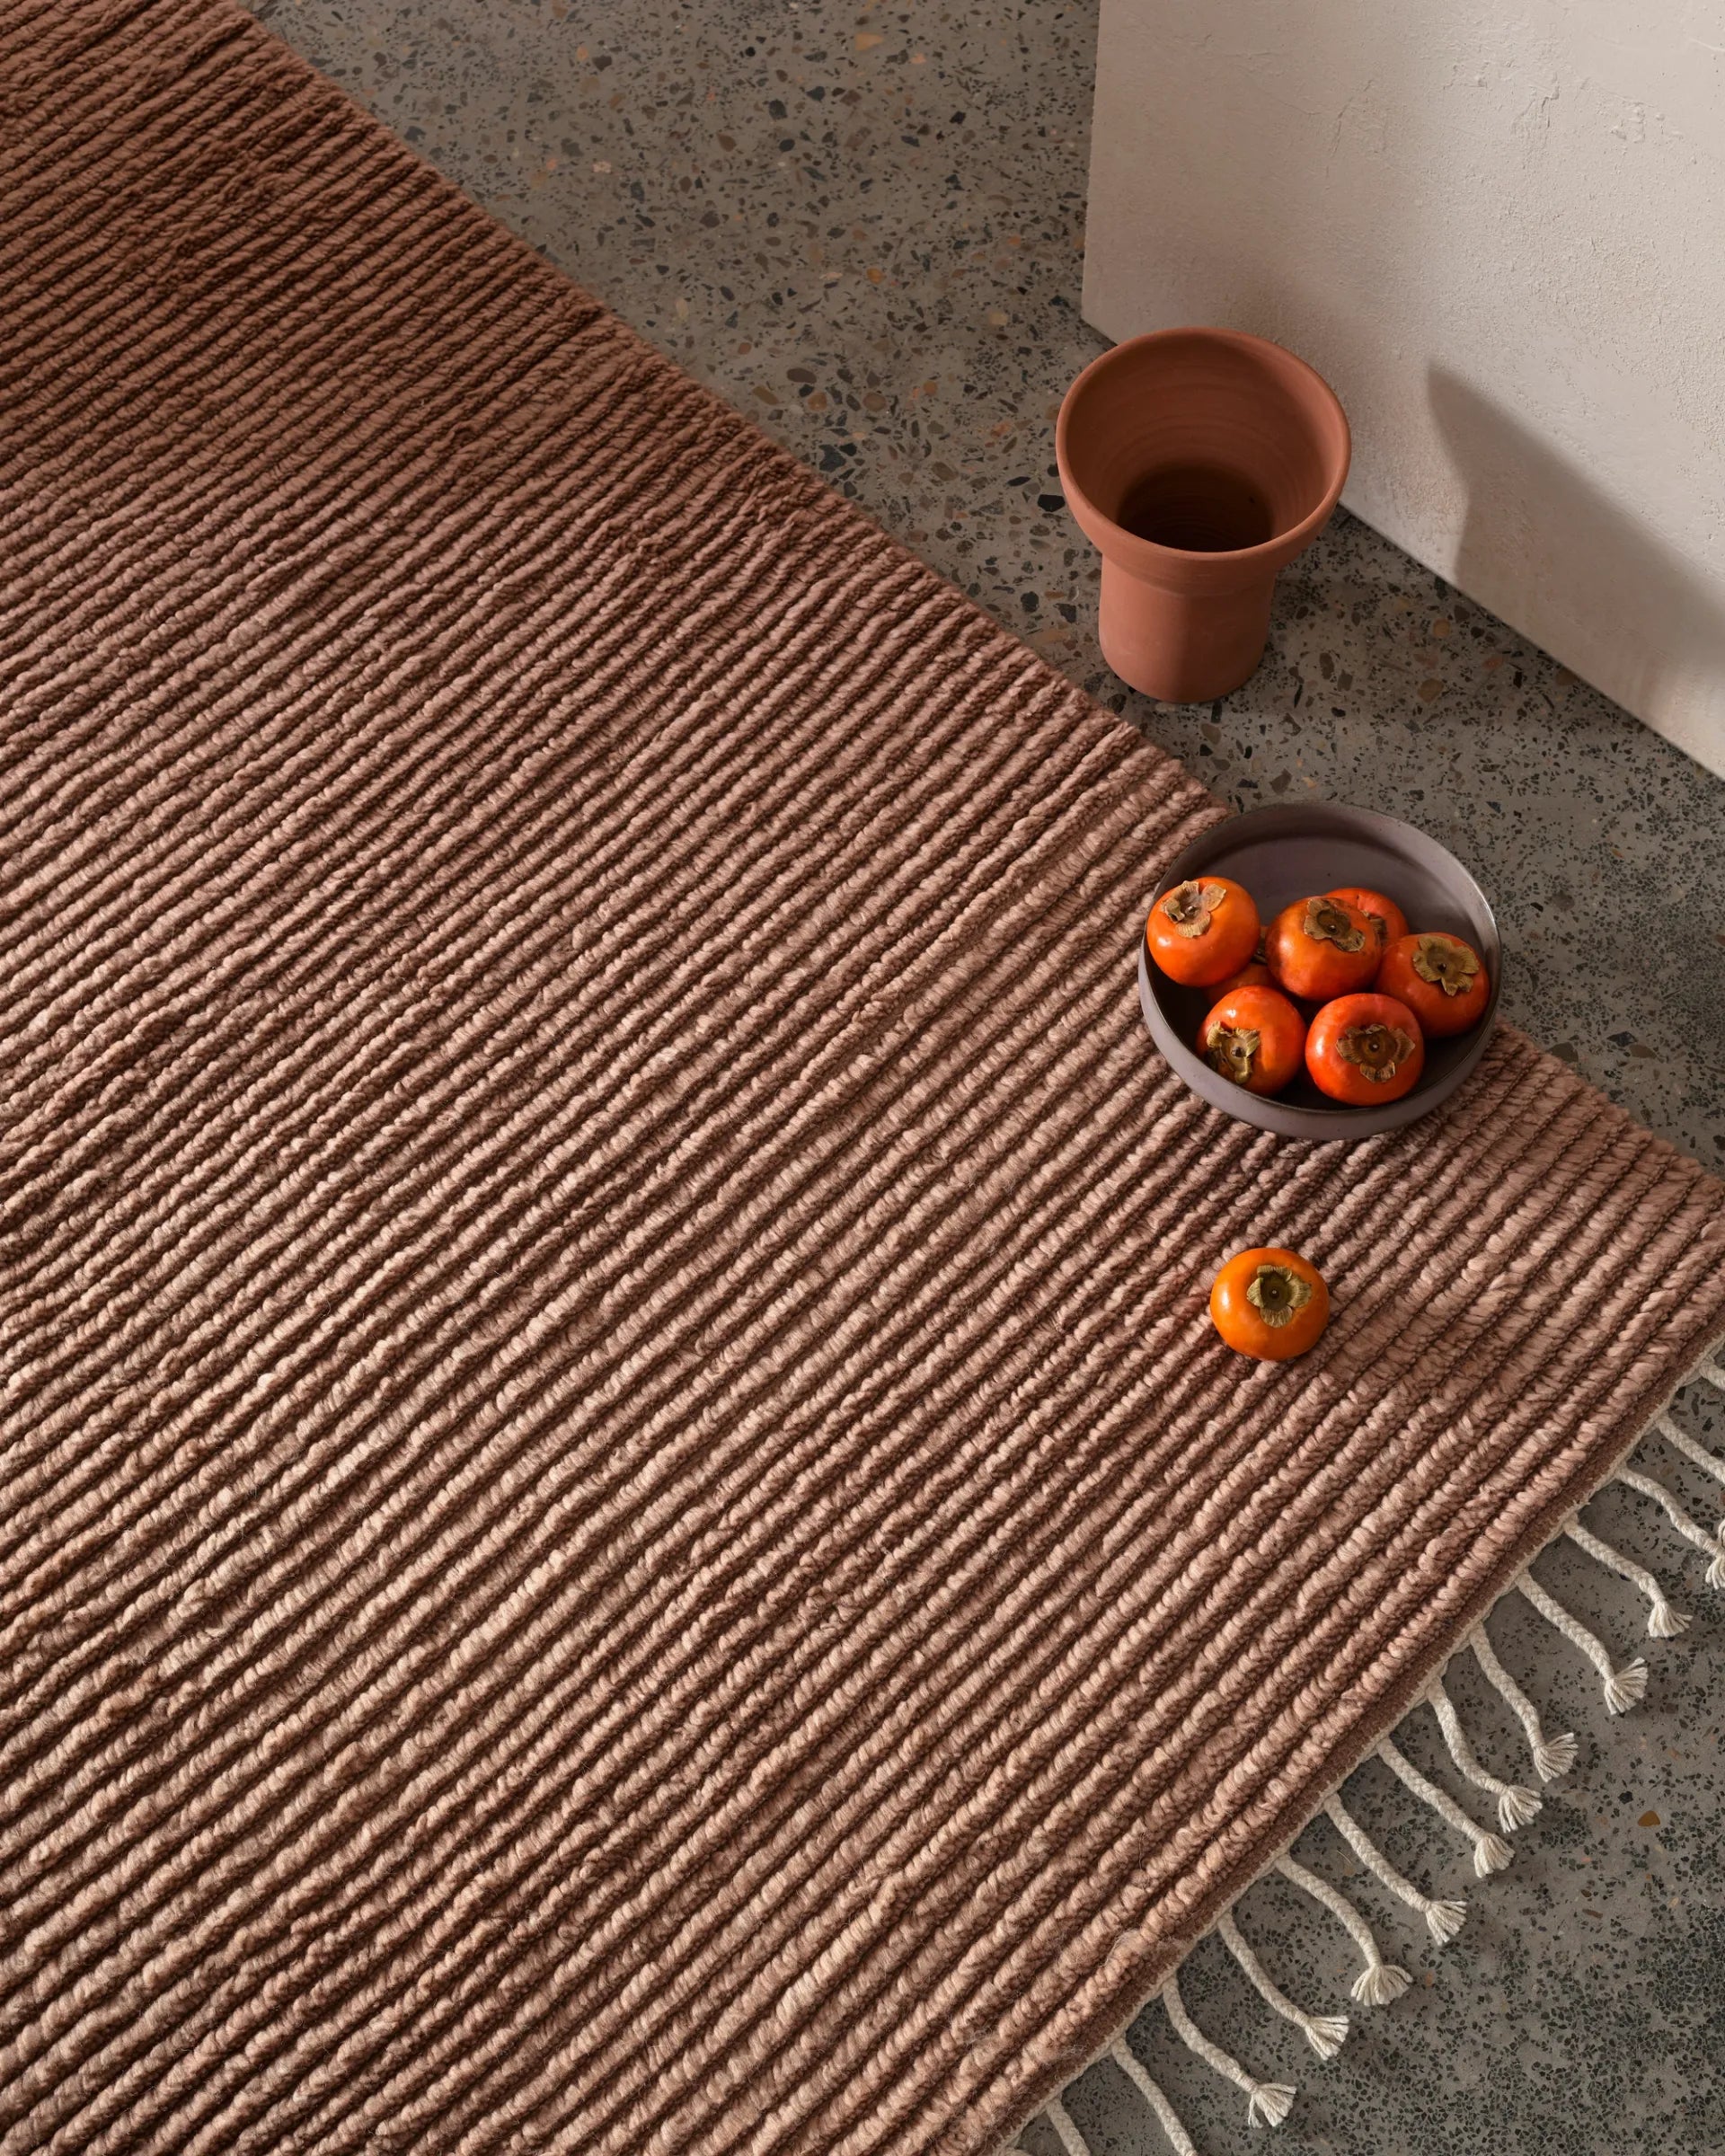 malawi rug collection by armadillo on adorn.house